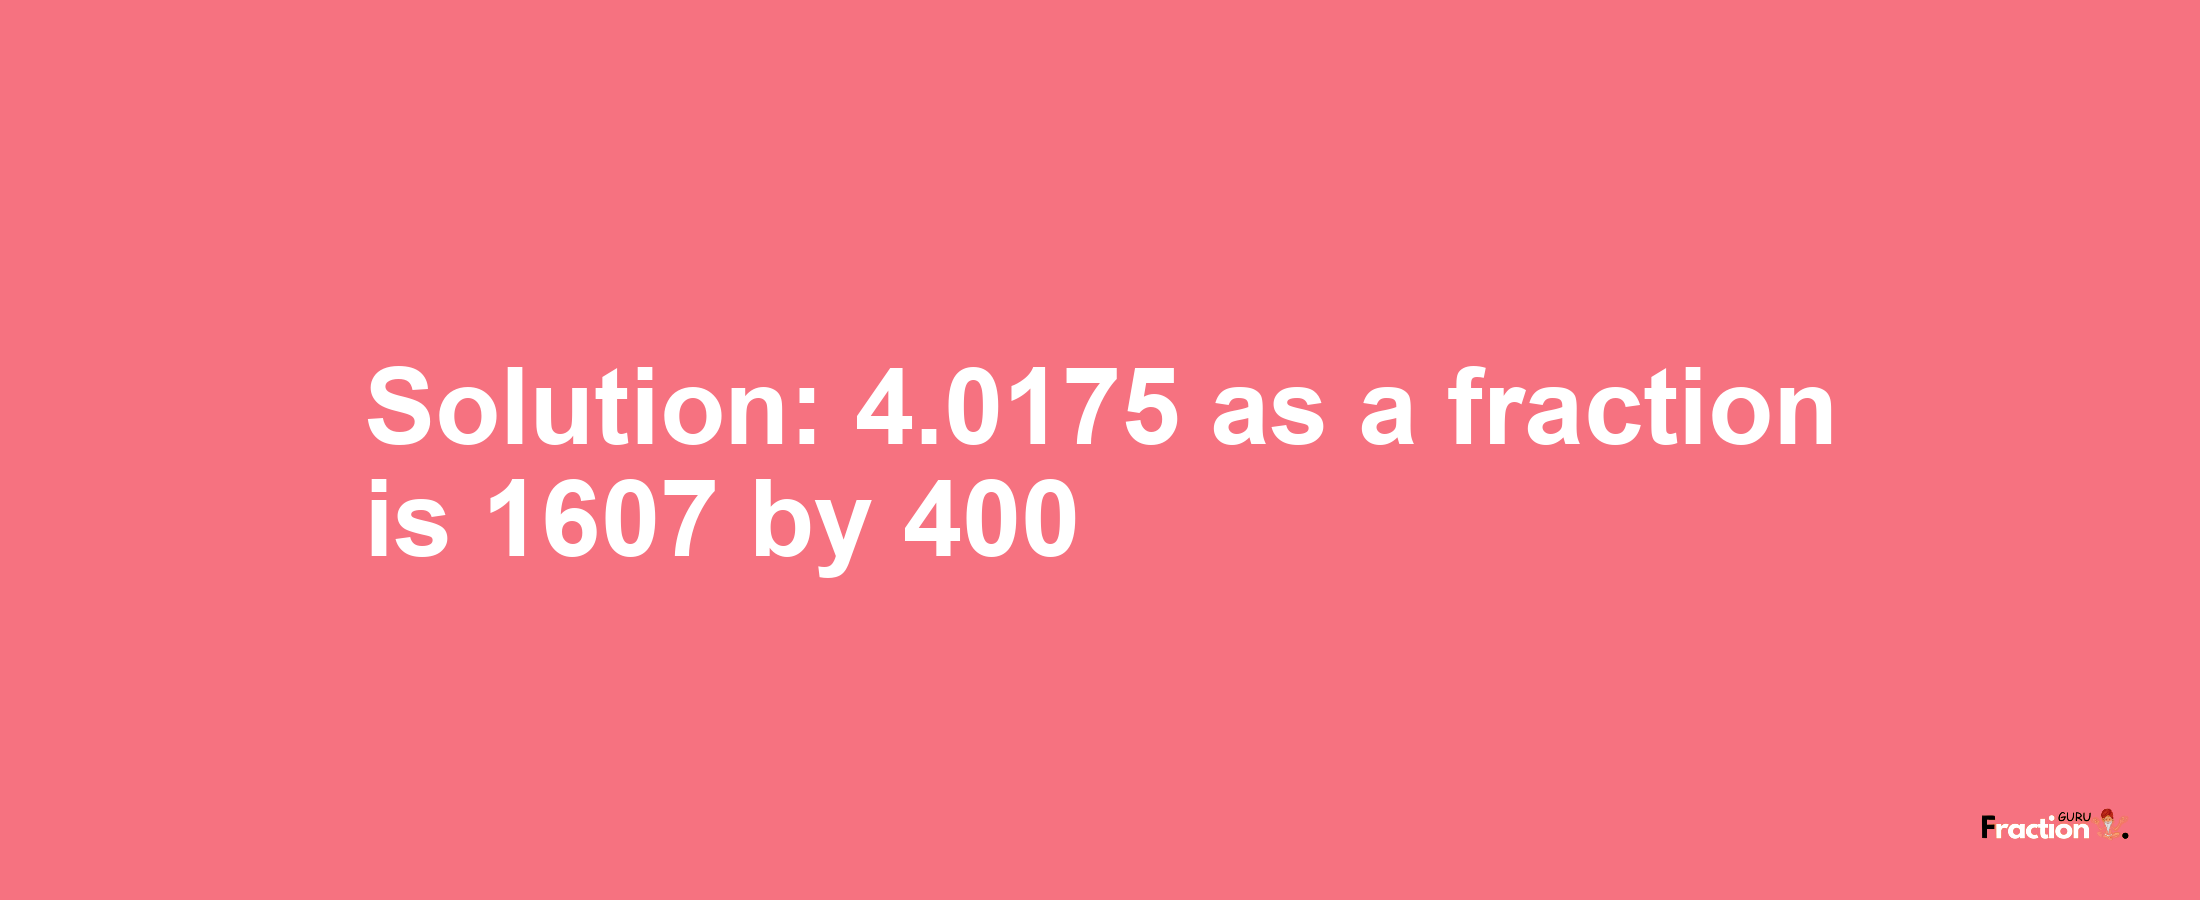 Solution:4.0175 as a fraction is 1607/400